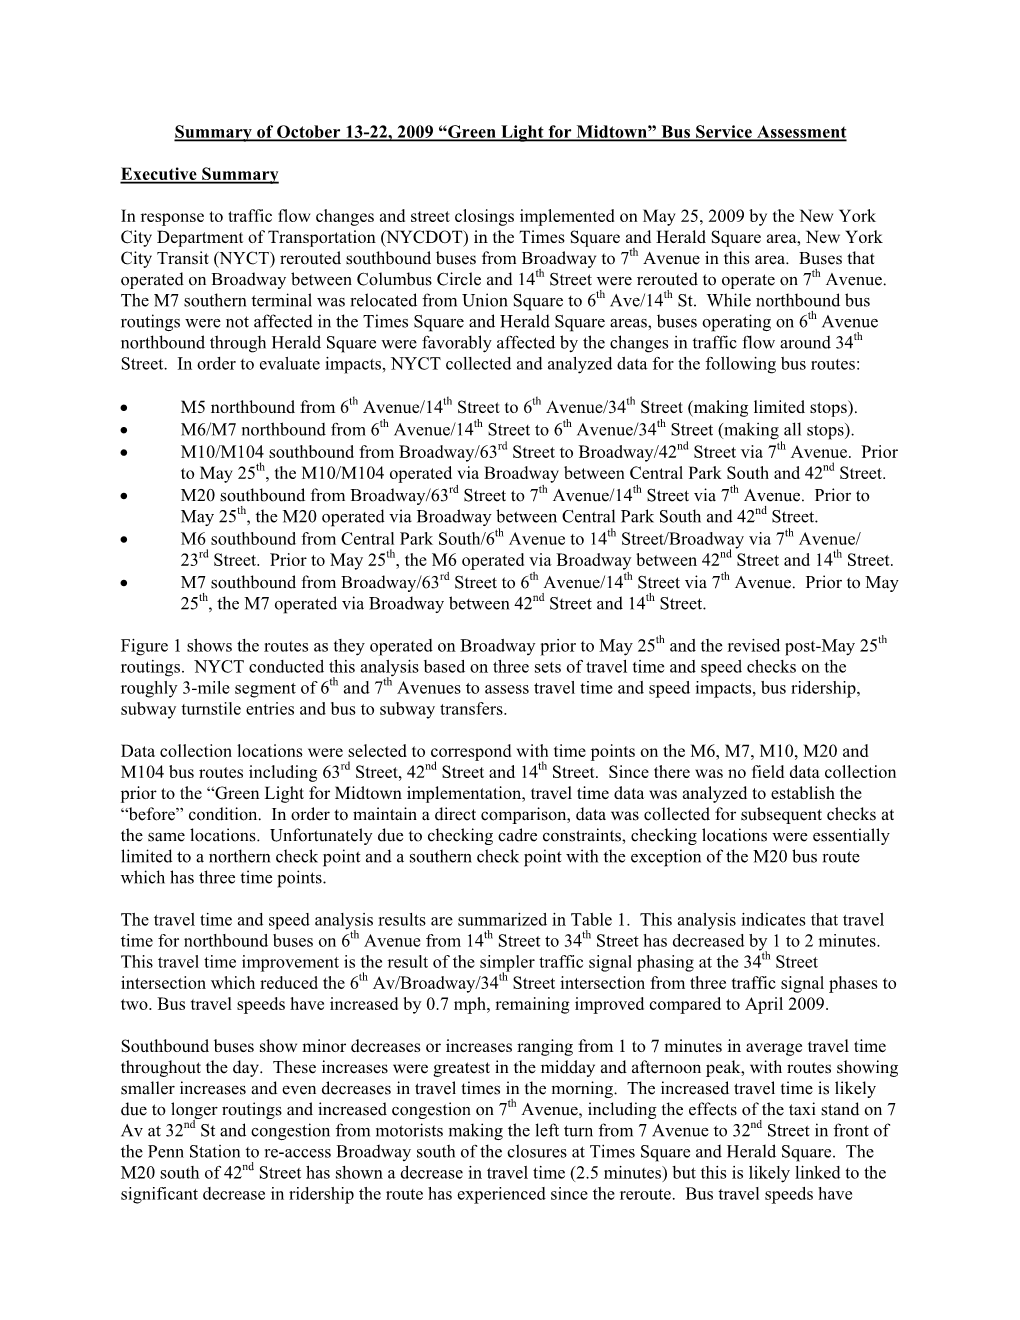 Summary of October 13-22, 2009 “Green Light for Midtown” Bus Service Assessment Executive Summary in Response to Traffic